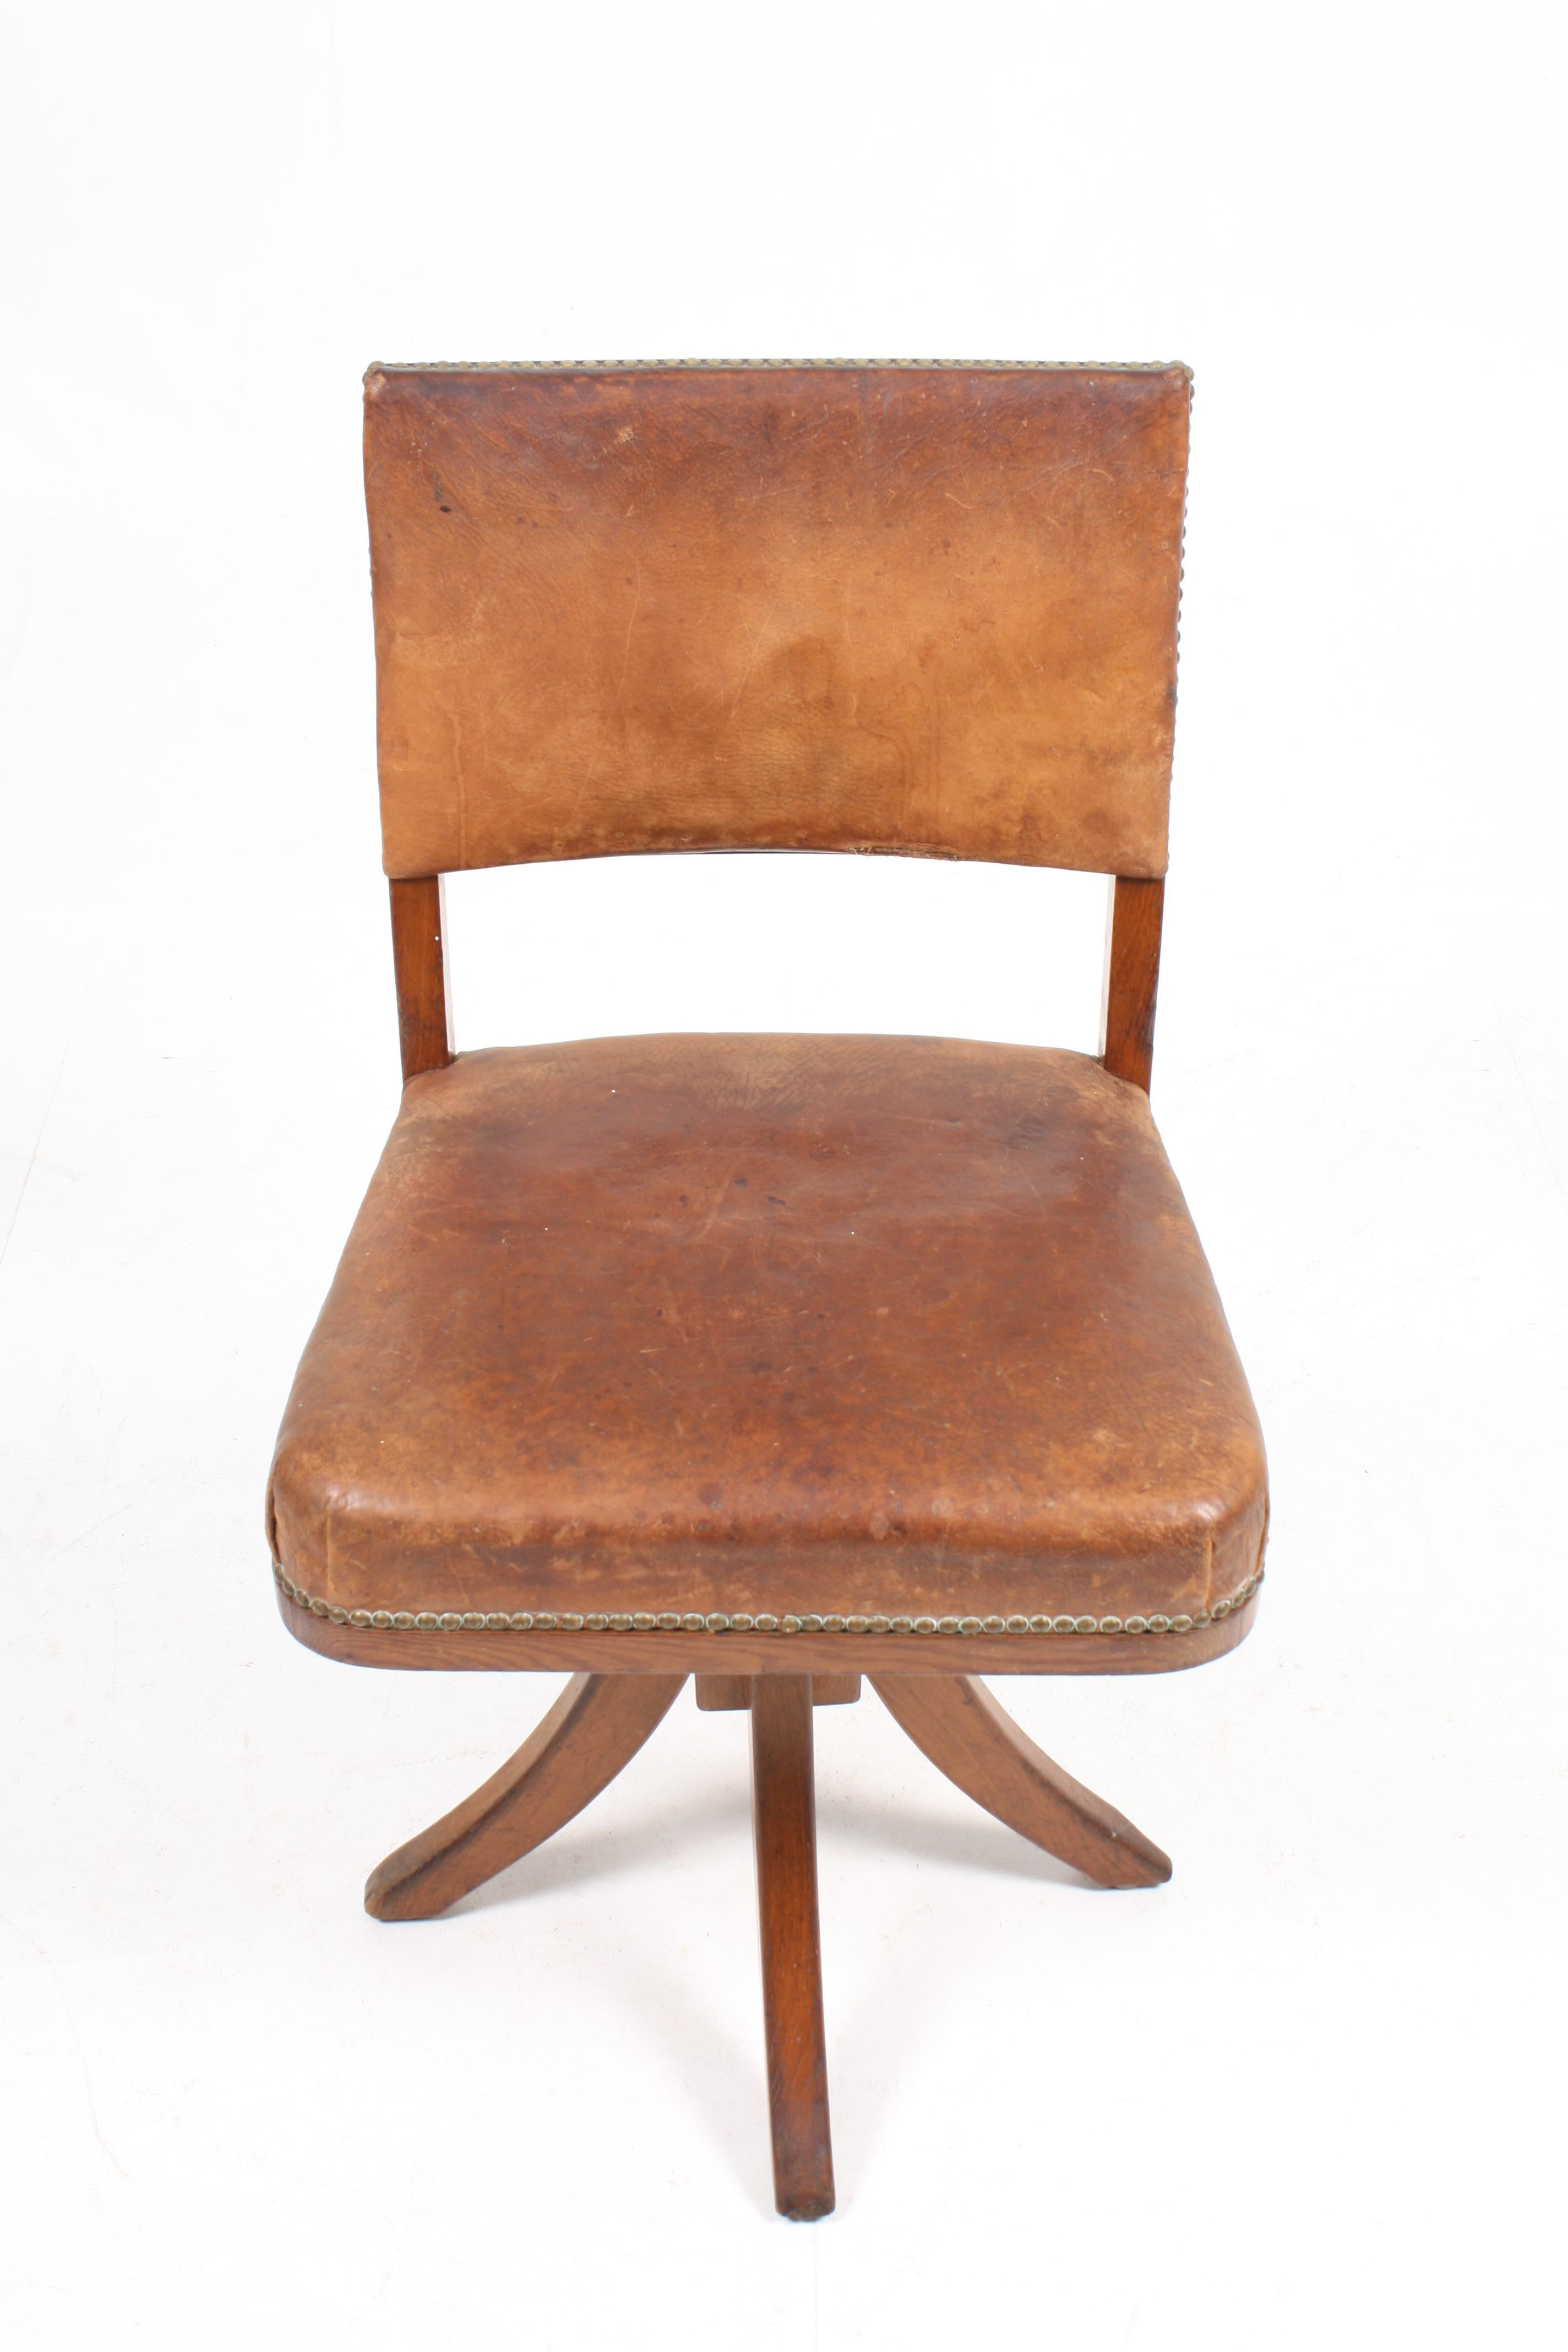 Mid-20th Century Desk Chair in Patinated Leather and Oak by Danish Cabinetmaker Frits Henningsen